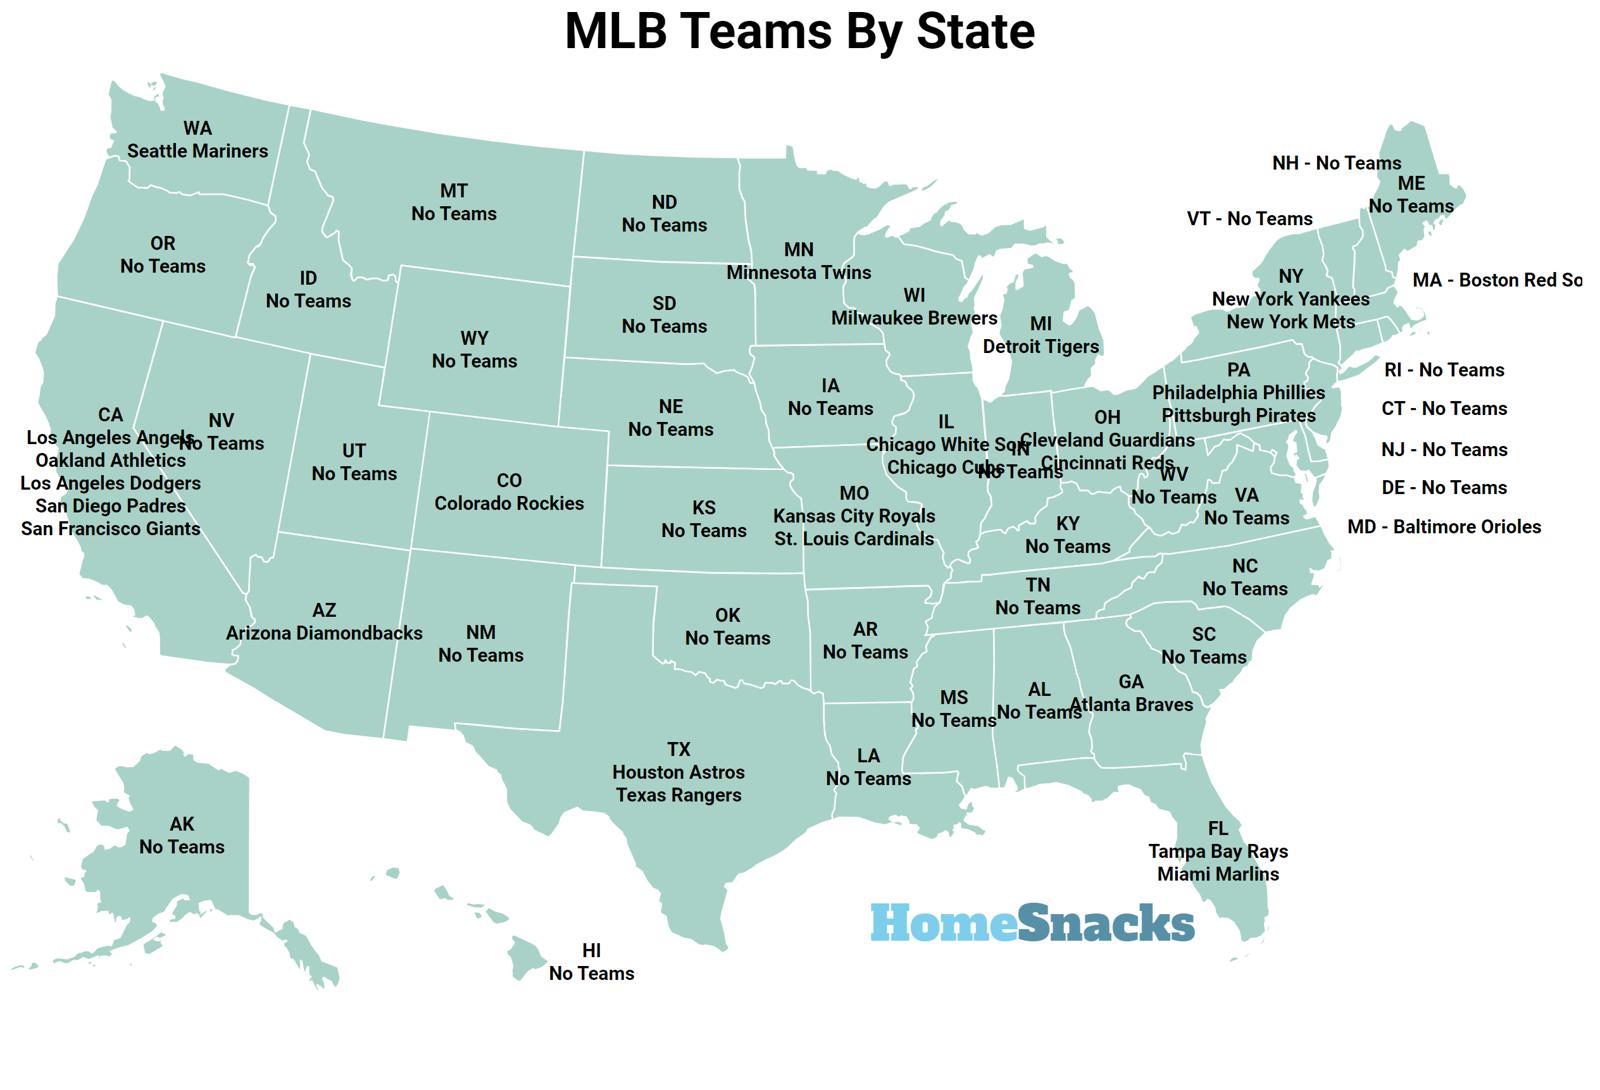 MLB Team Names By State